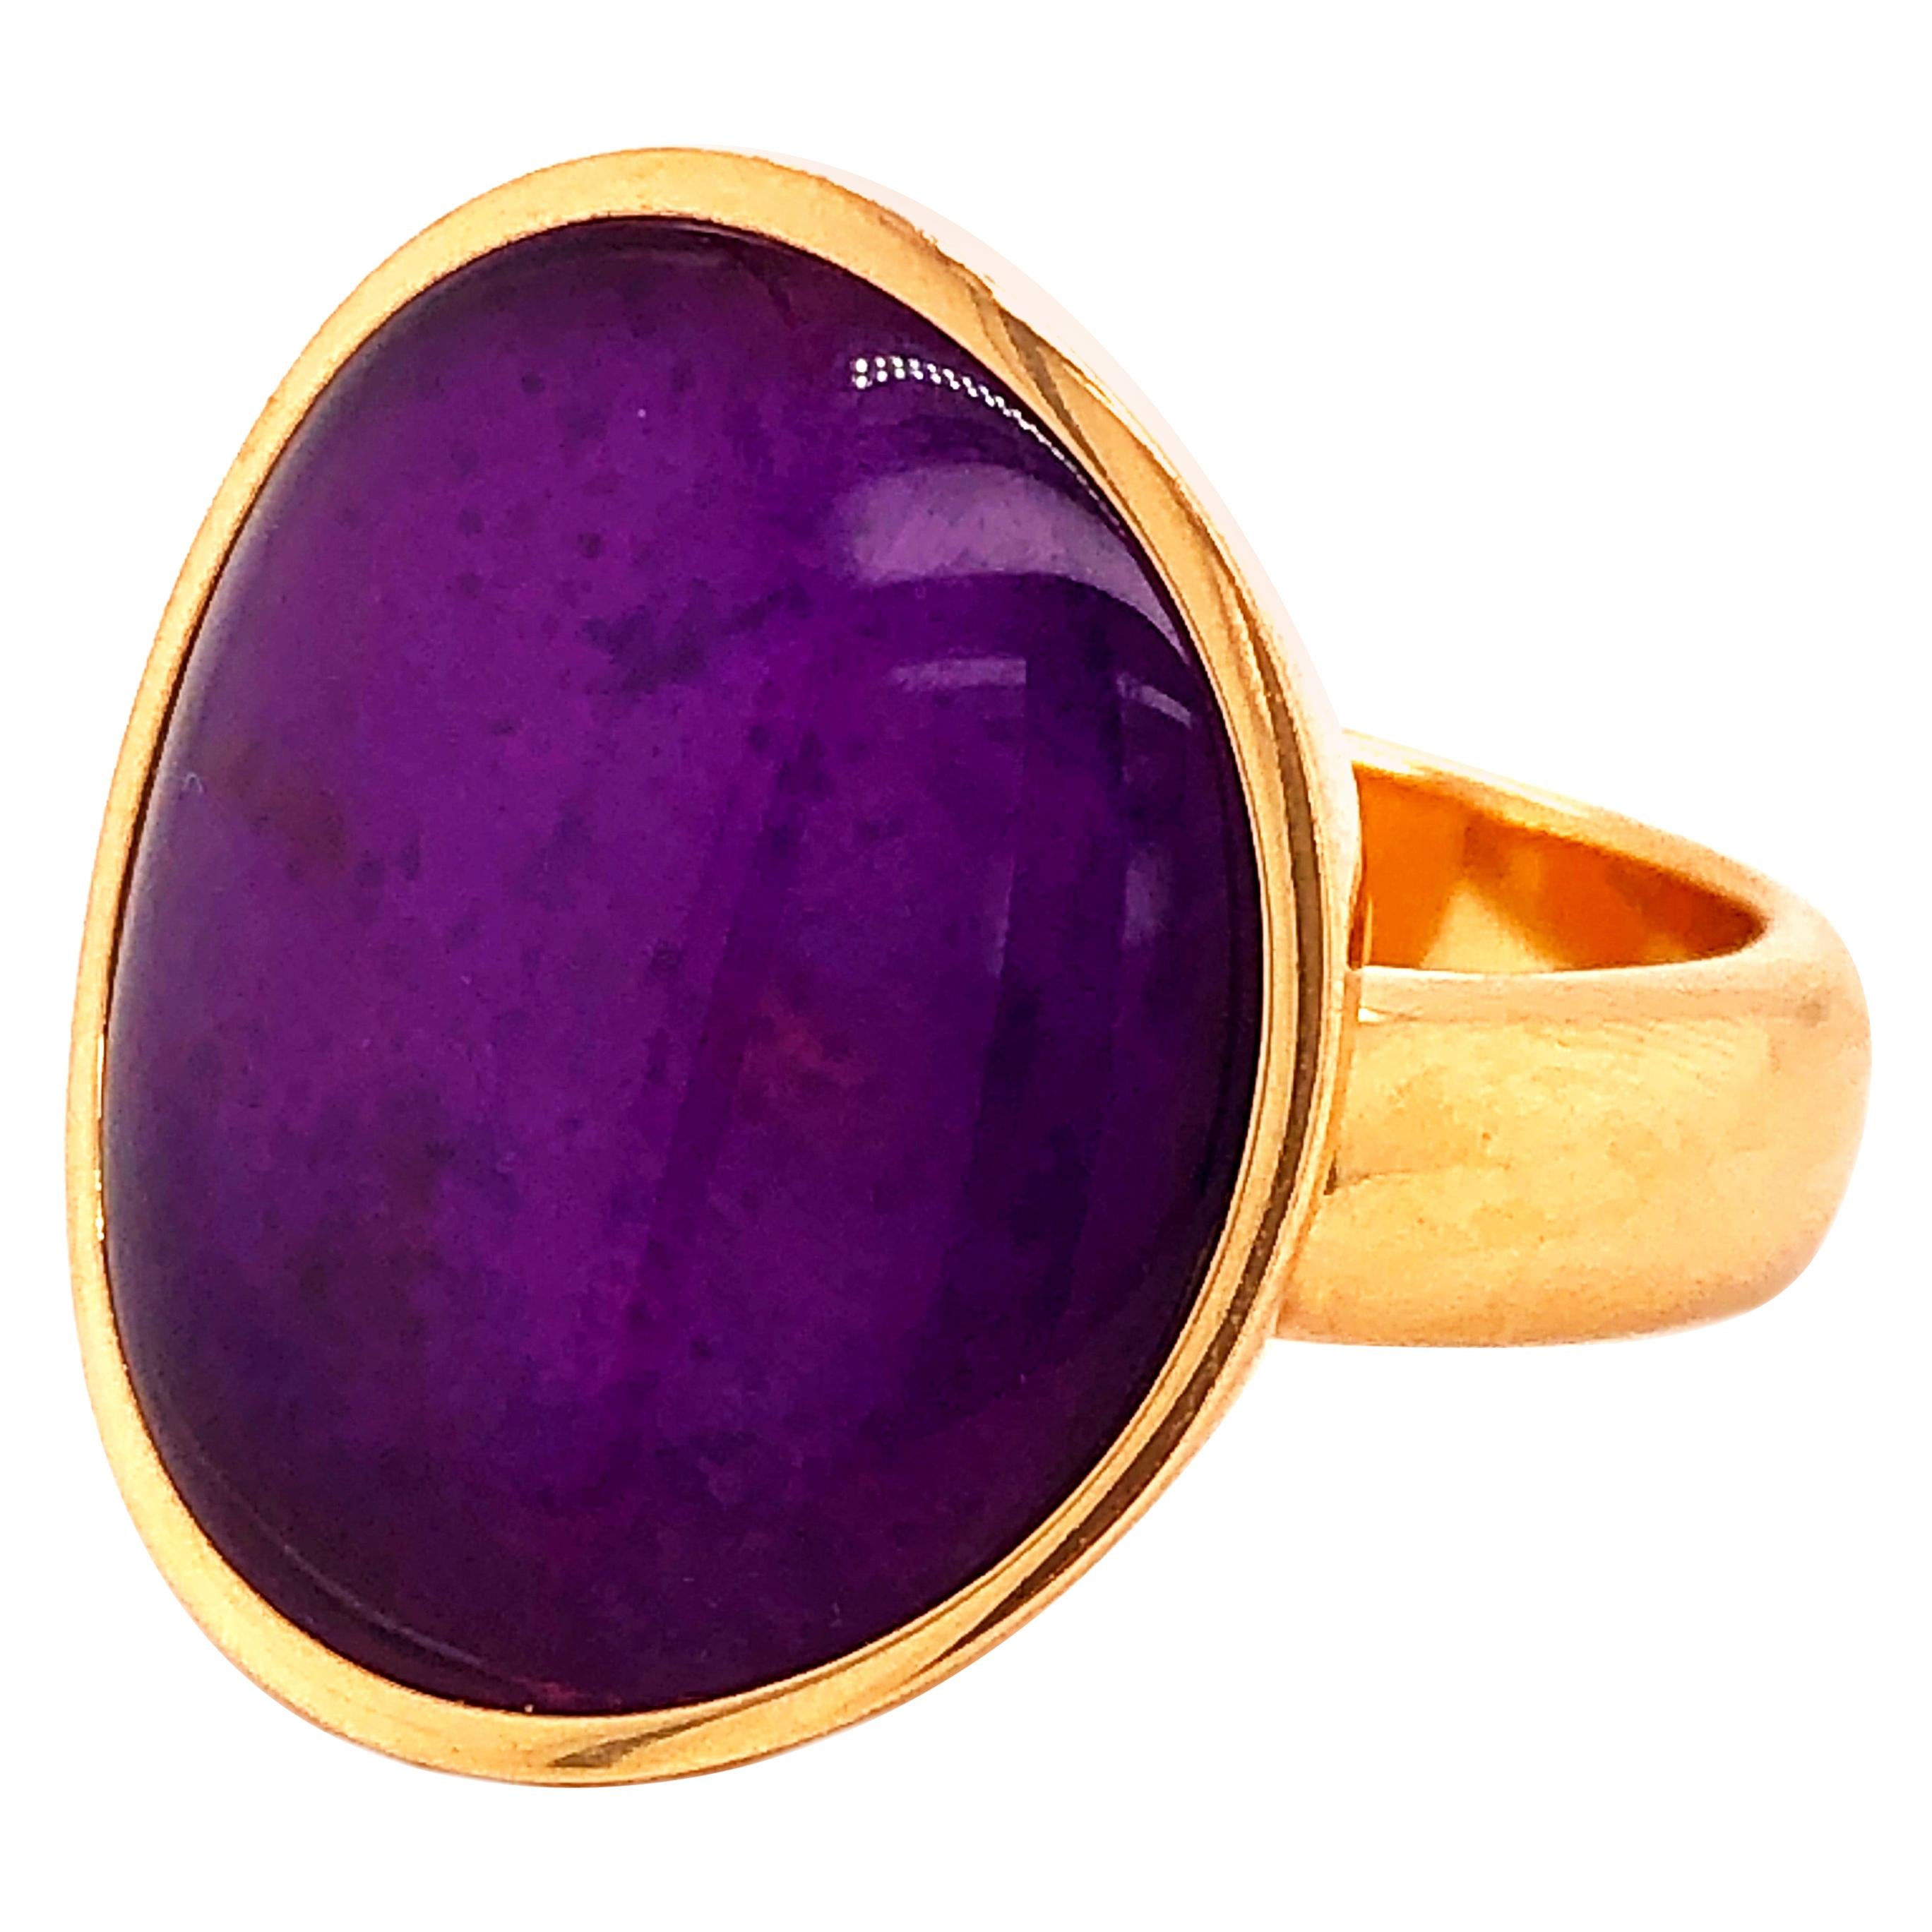 Vhernier Rare Sugilite Rock Cystal Giotto Collection Yellow Gold Cocktail Ring